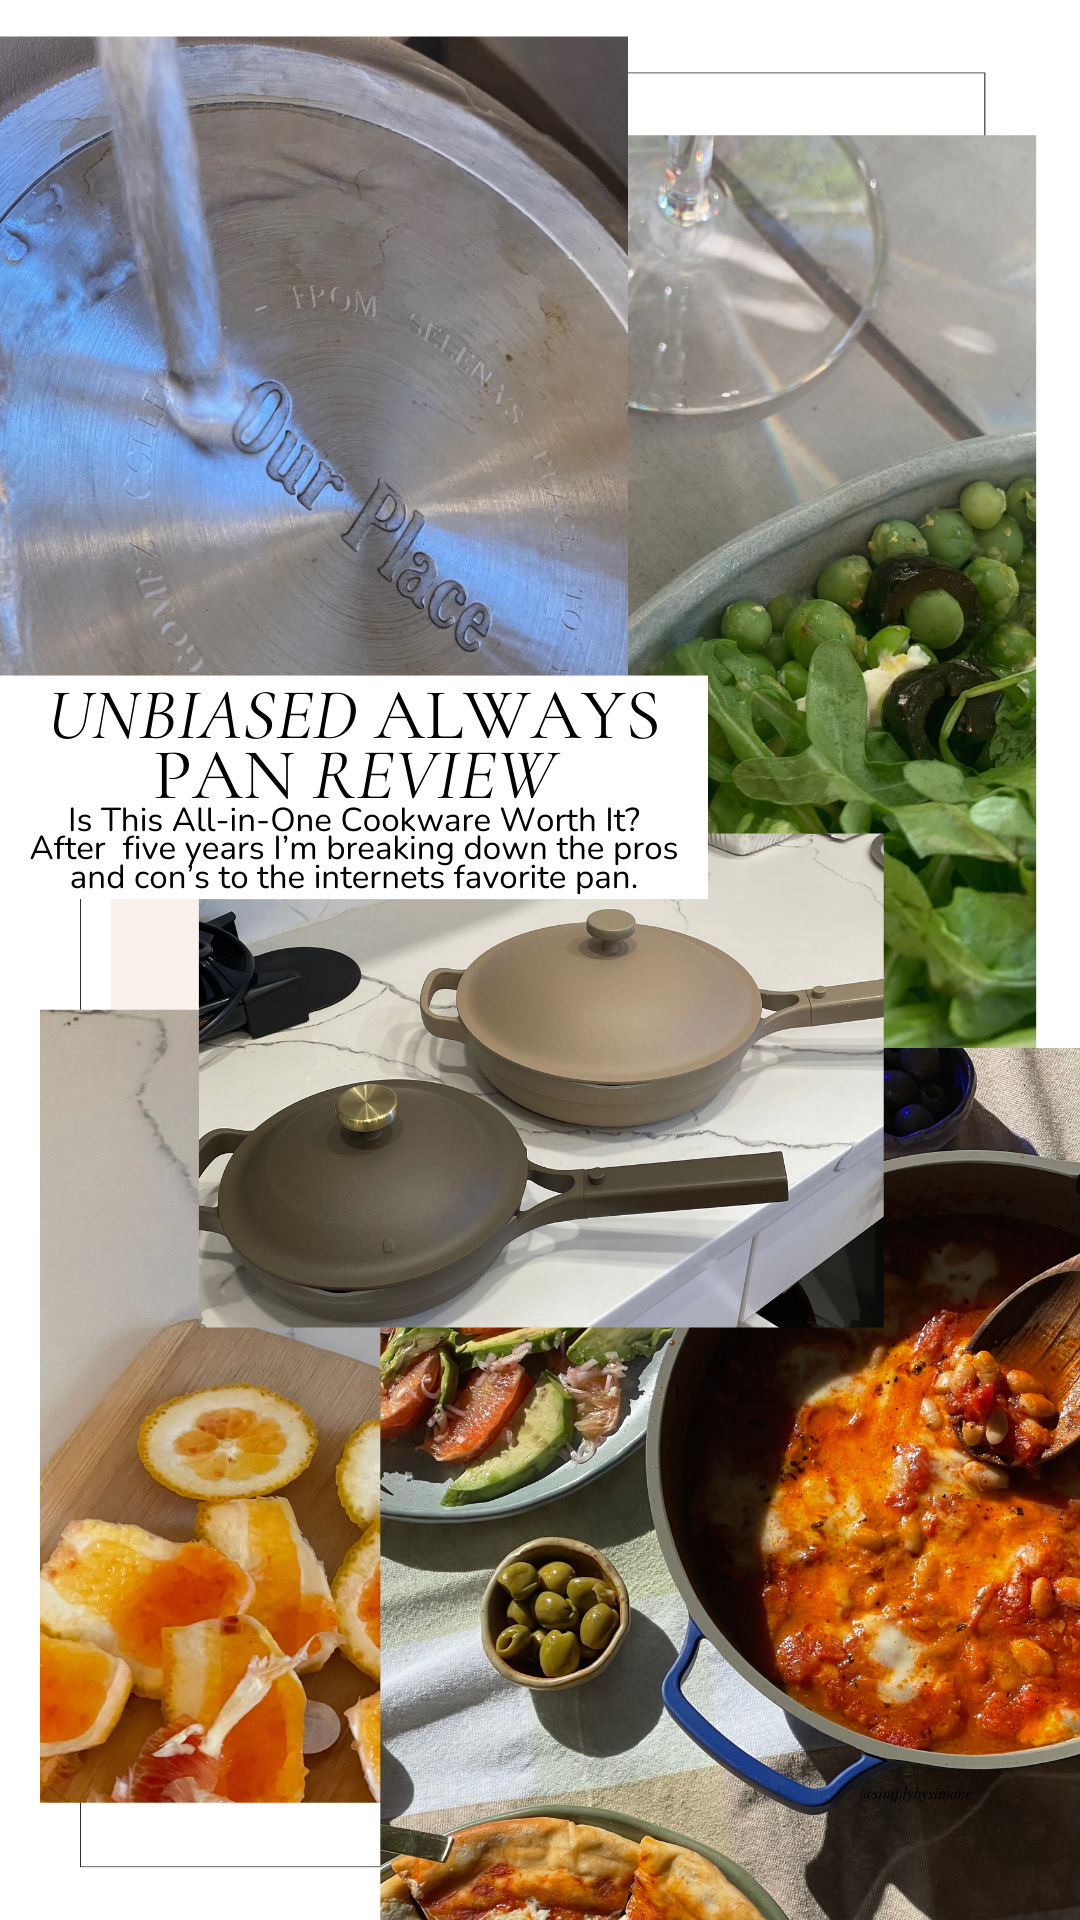 Collage of Always Pans, Food in Always Pan, Washing Always Pan Cover Image for Review